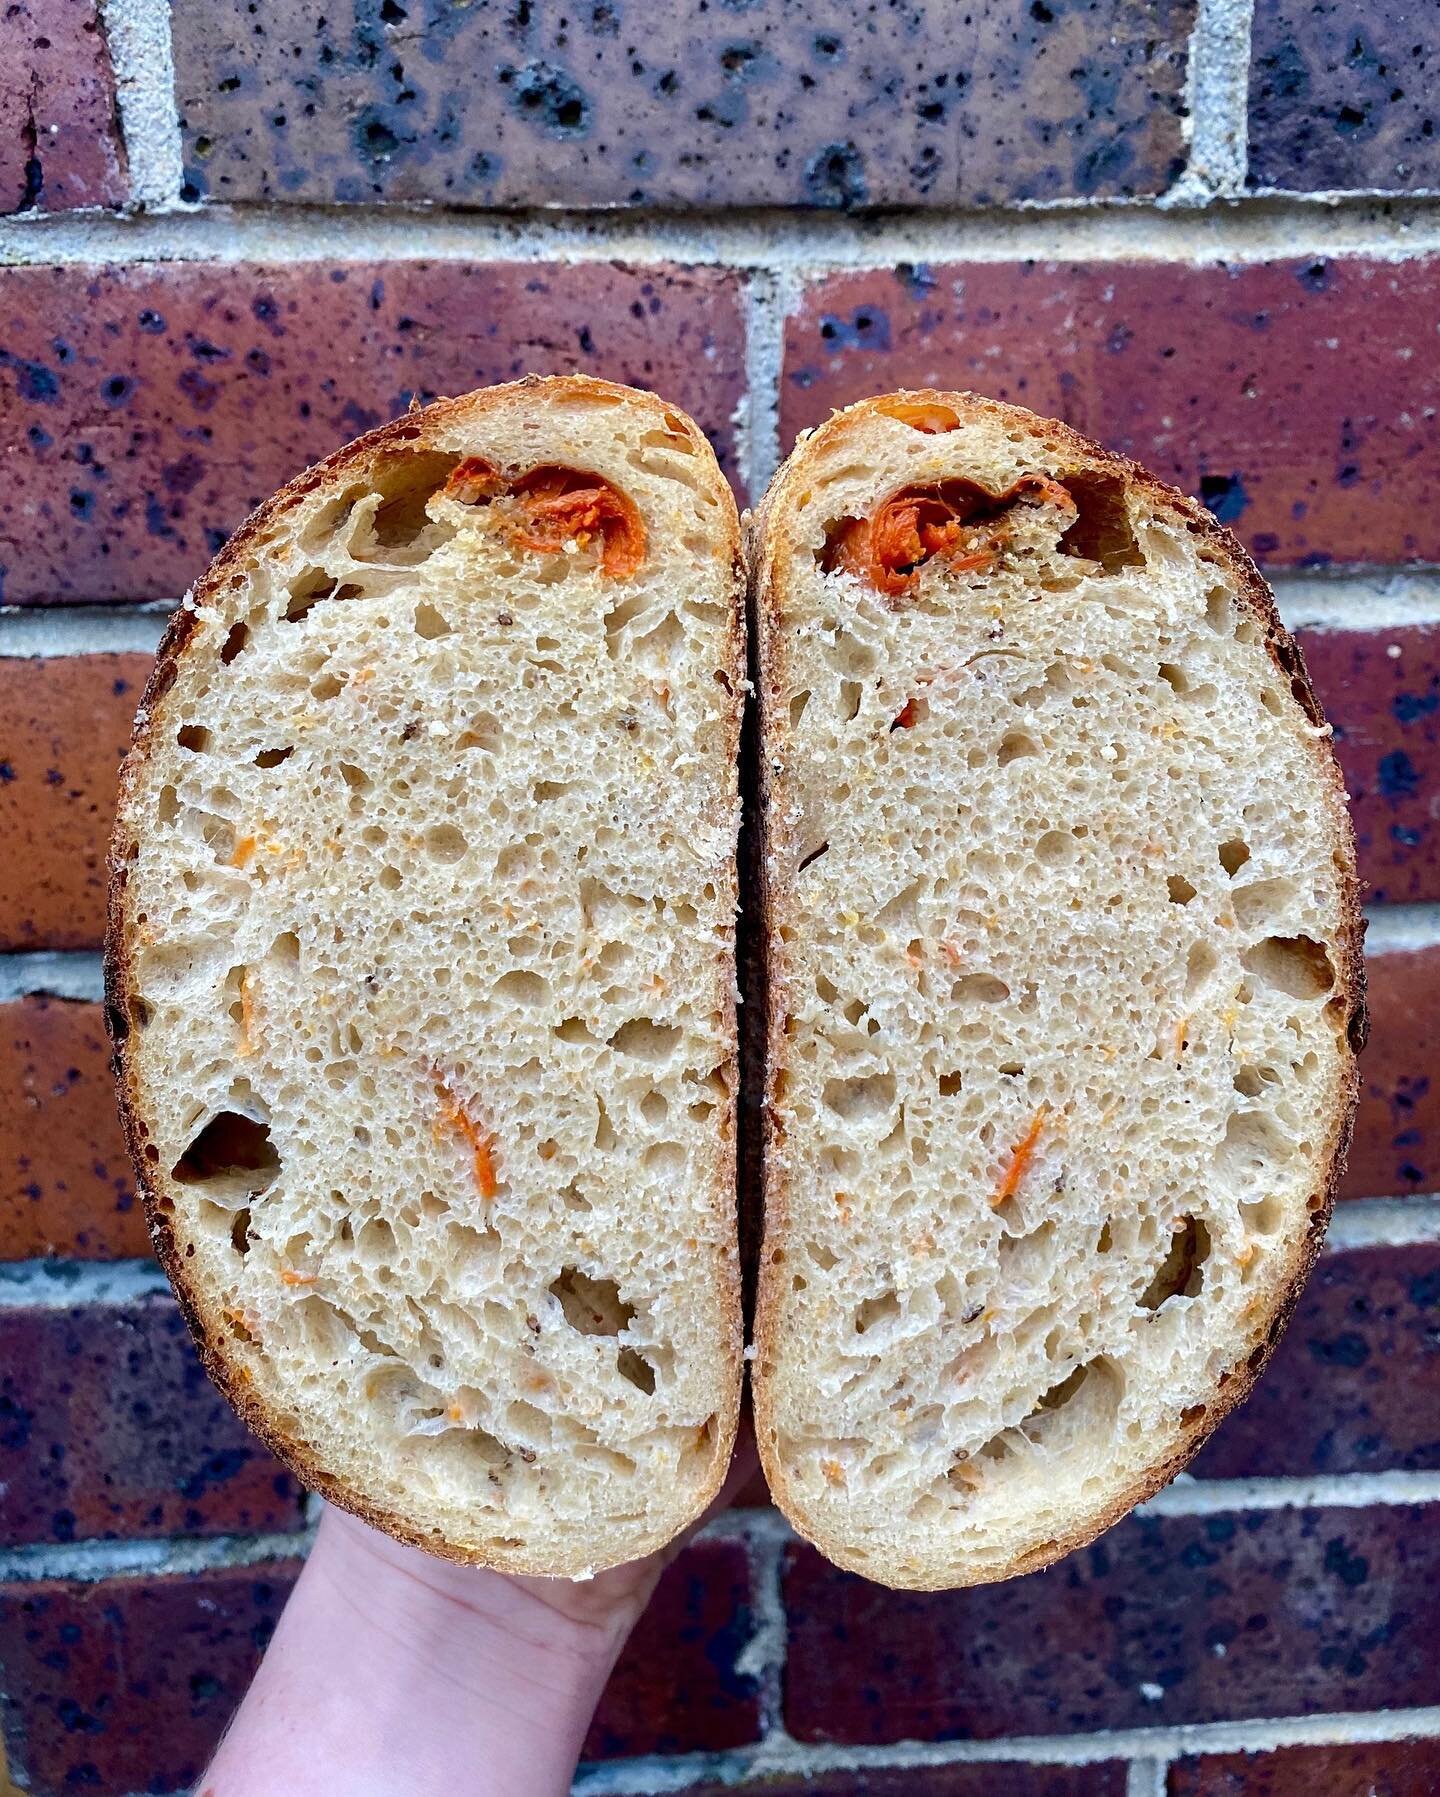 Our special loaf today is roast carrot and caraway! 
⠀⠀⠀⠀⠀⠀⠀⠀⠀
⠀⠀⠀⠀⠀⠀⠀⠀⠀
⠀⠀⠀⠀⠀⠀⠀⠀⠀
#betterbread #bredco #bredbread #albany #sustainable #artisanbread #lovacore #sourdough #realbread #flourwatersalt #localproduce #amazingalbany #greatsouthern #pornodi